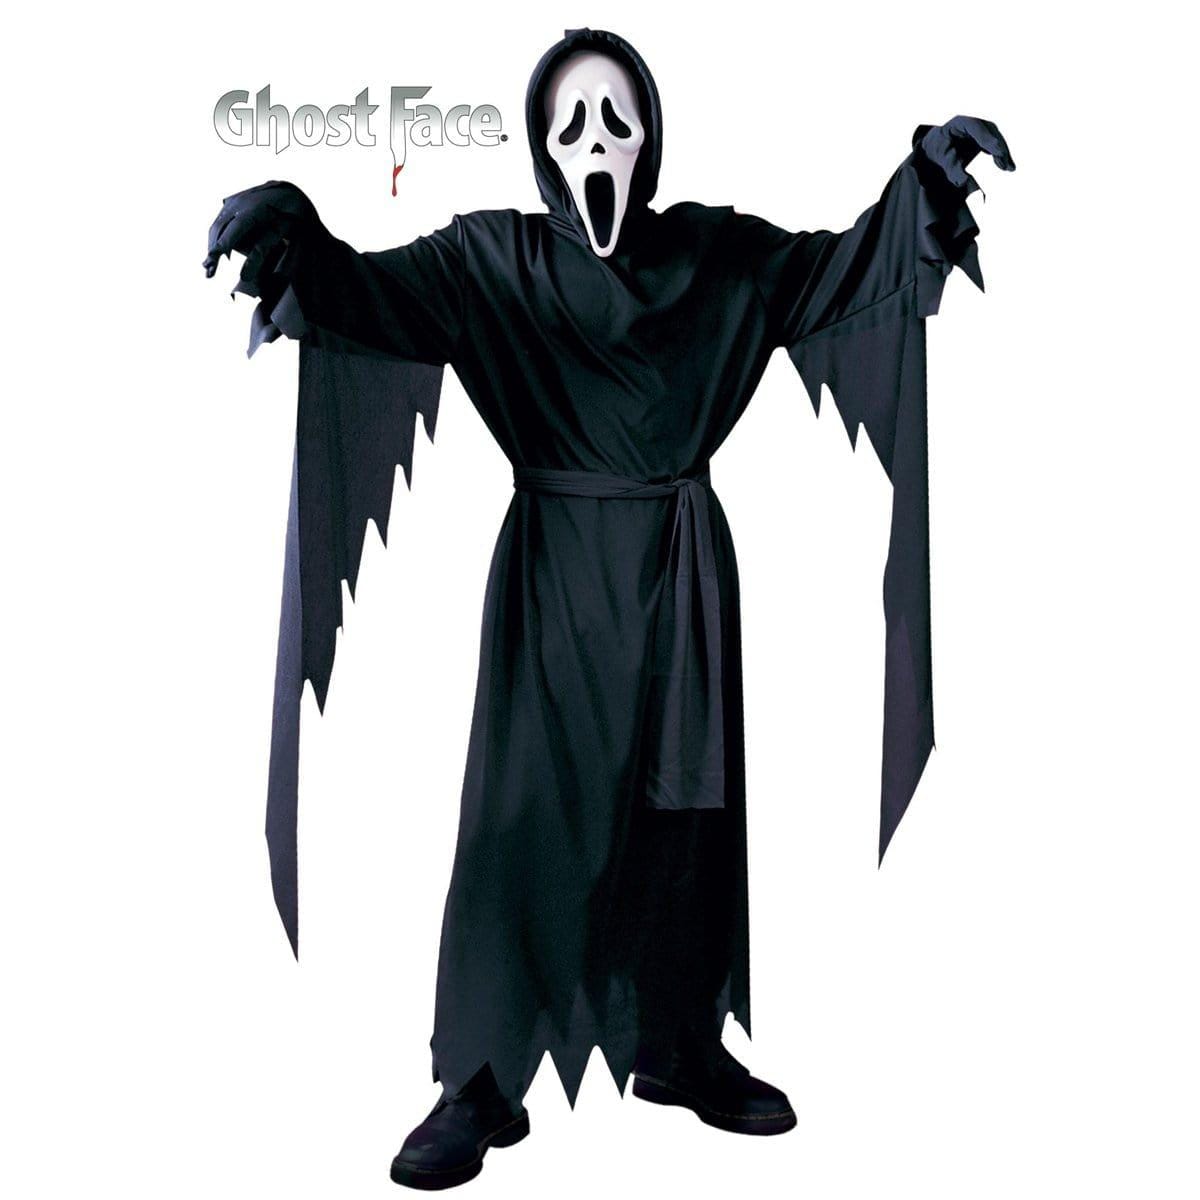 Ghostface costume for boys, Scream, Black Hooded Robe | Party Expert